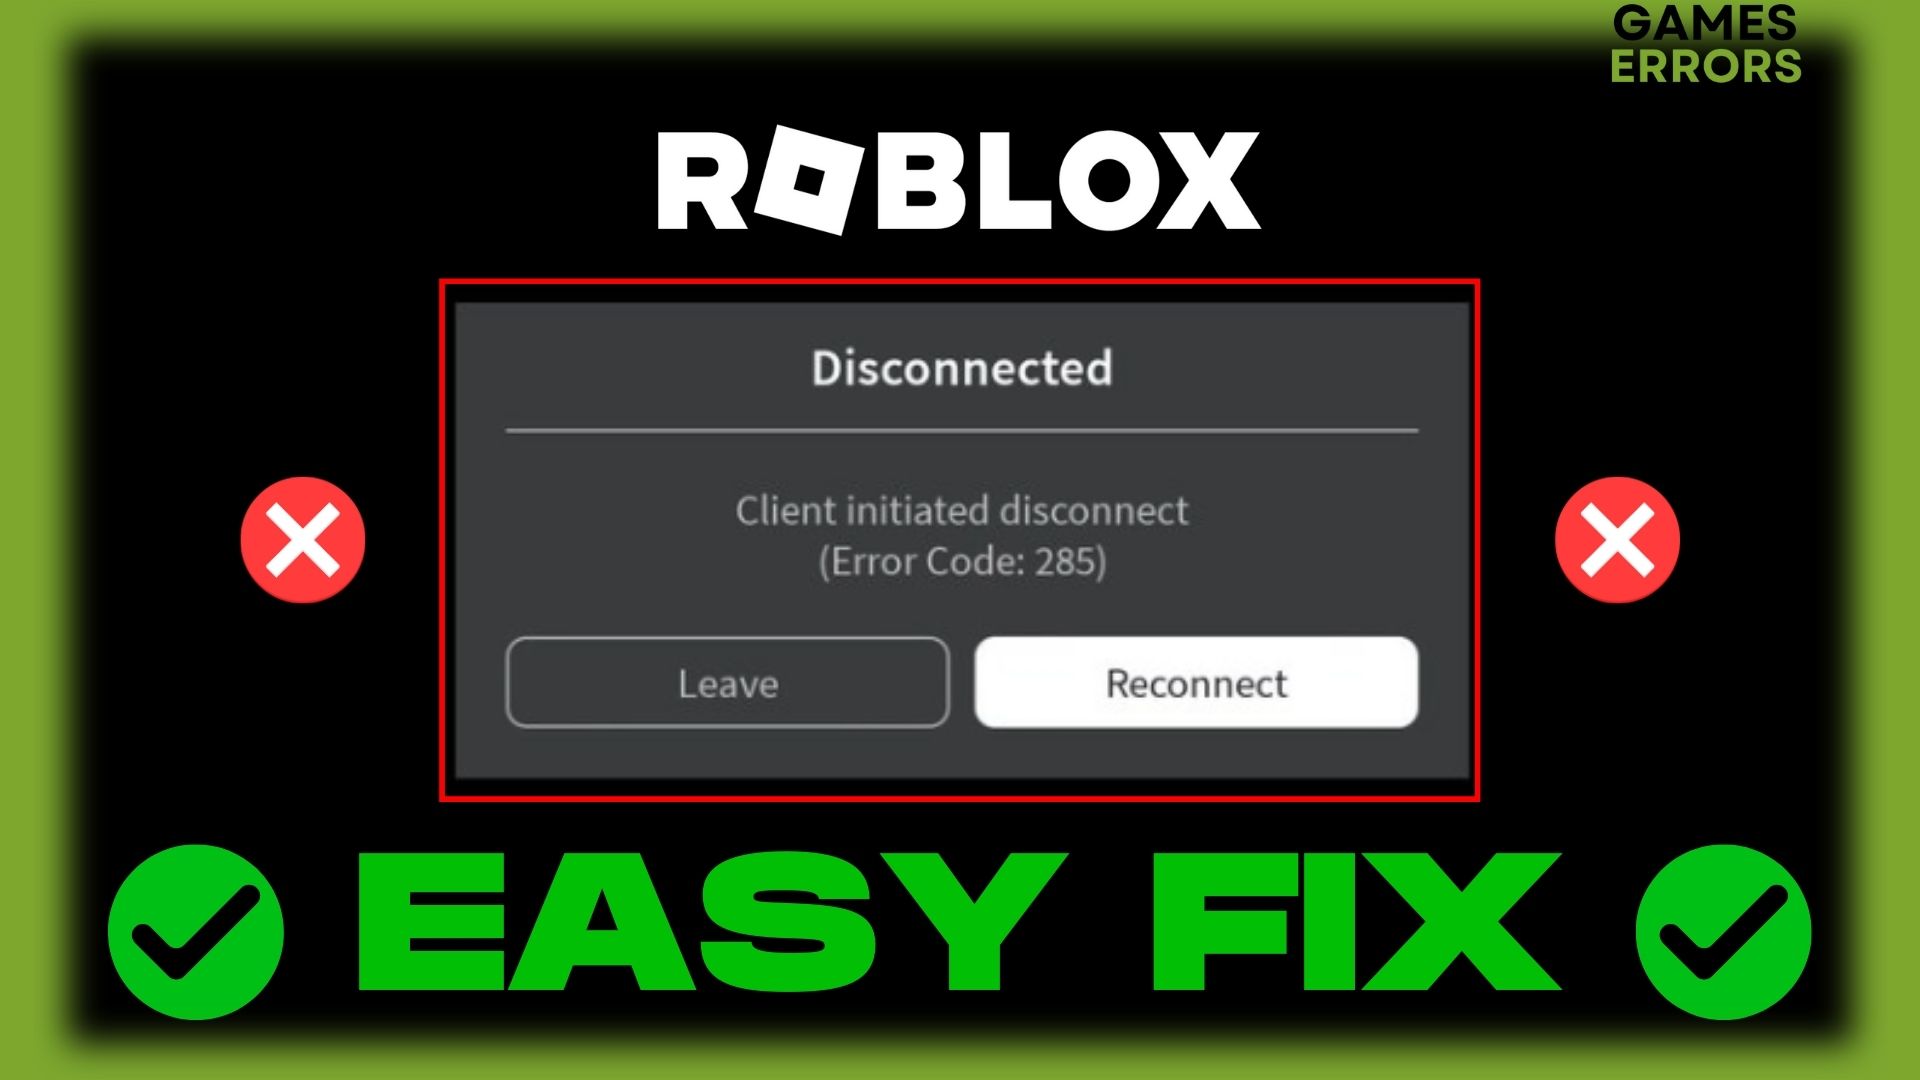 Roblox Error Code 277 Explained: Reasons & How To Fix